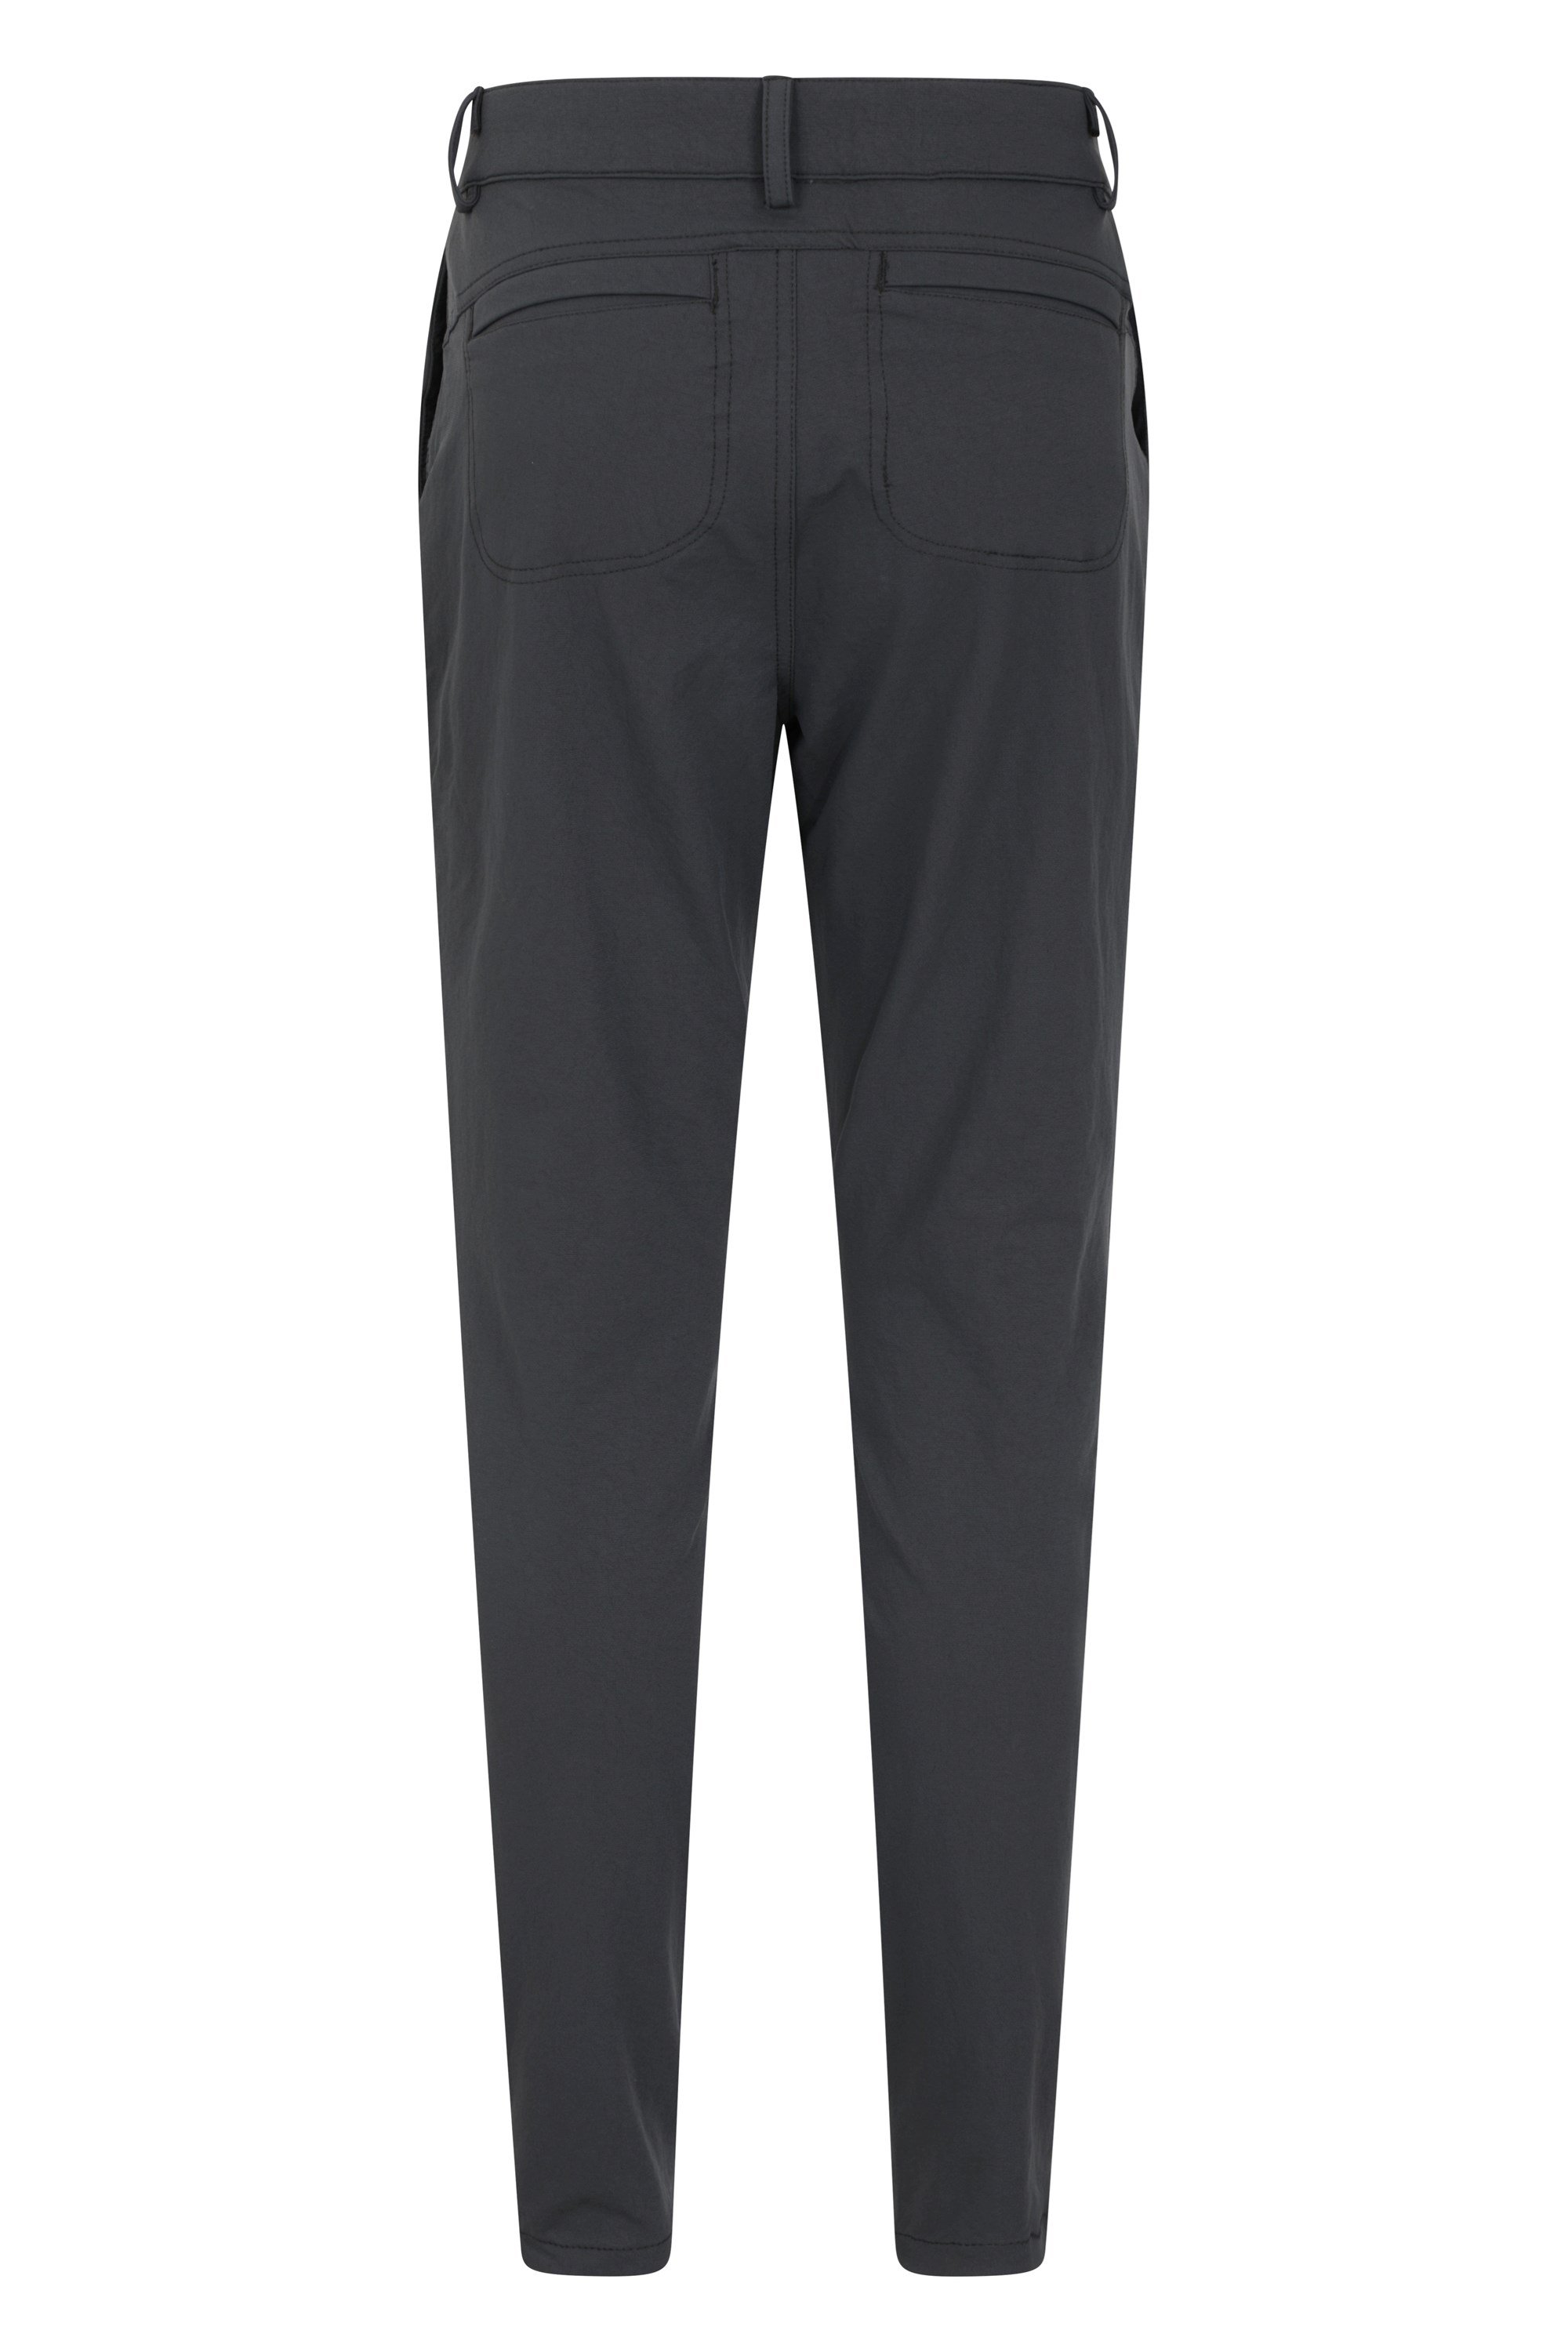 Ladies Walking Trousers With Pocket NL | Rydale